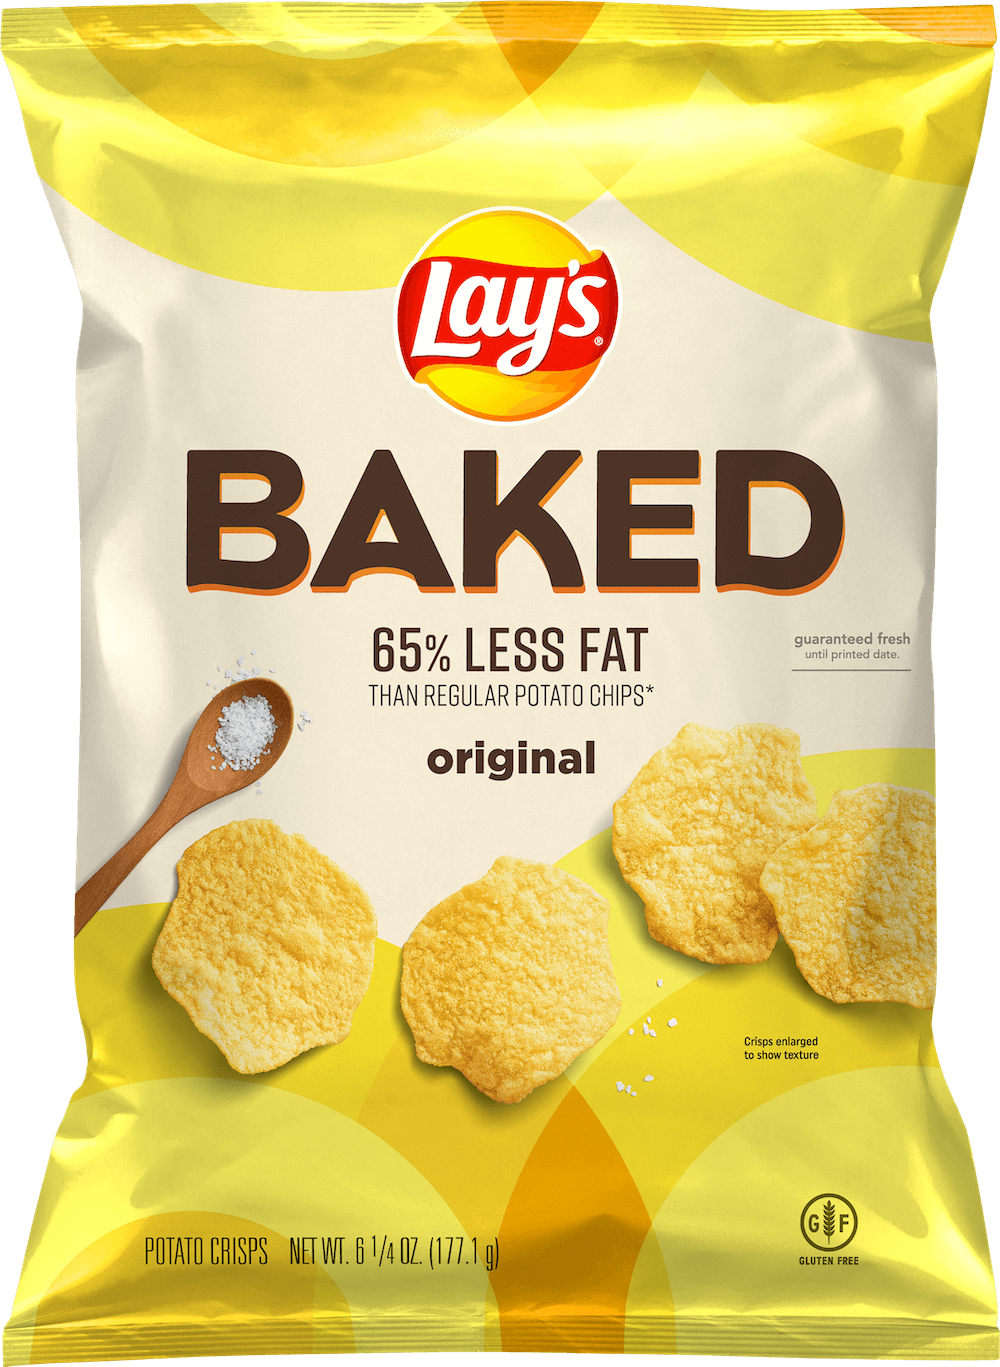 https://www.fritolay.com/sites/fritolay.com/files/2022-02/Baked_2021_Lays_ORIG_6.25oz_Render.png